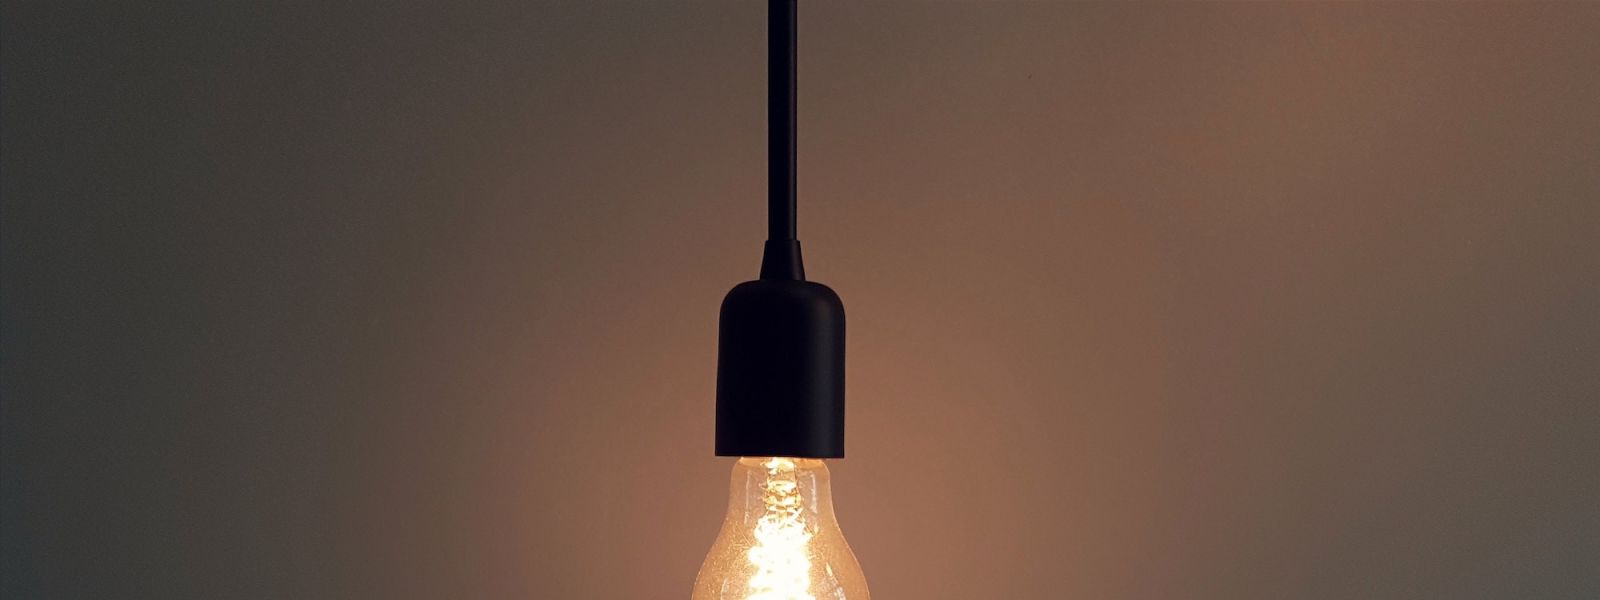 Why innovation becomes more critical as your business matures